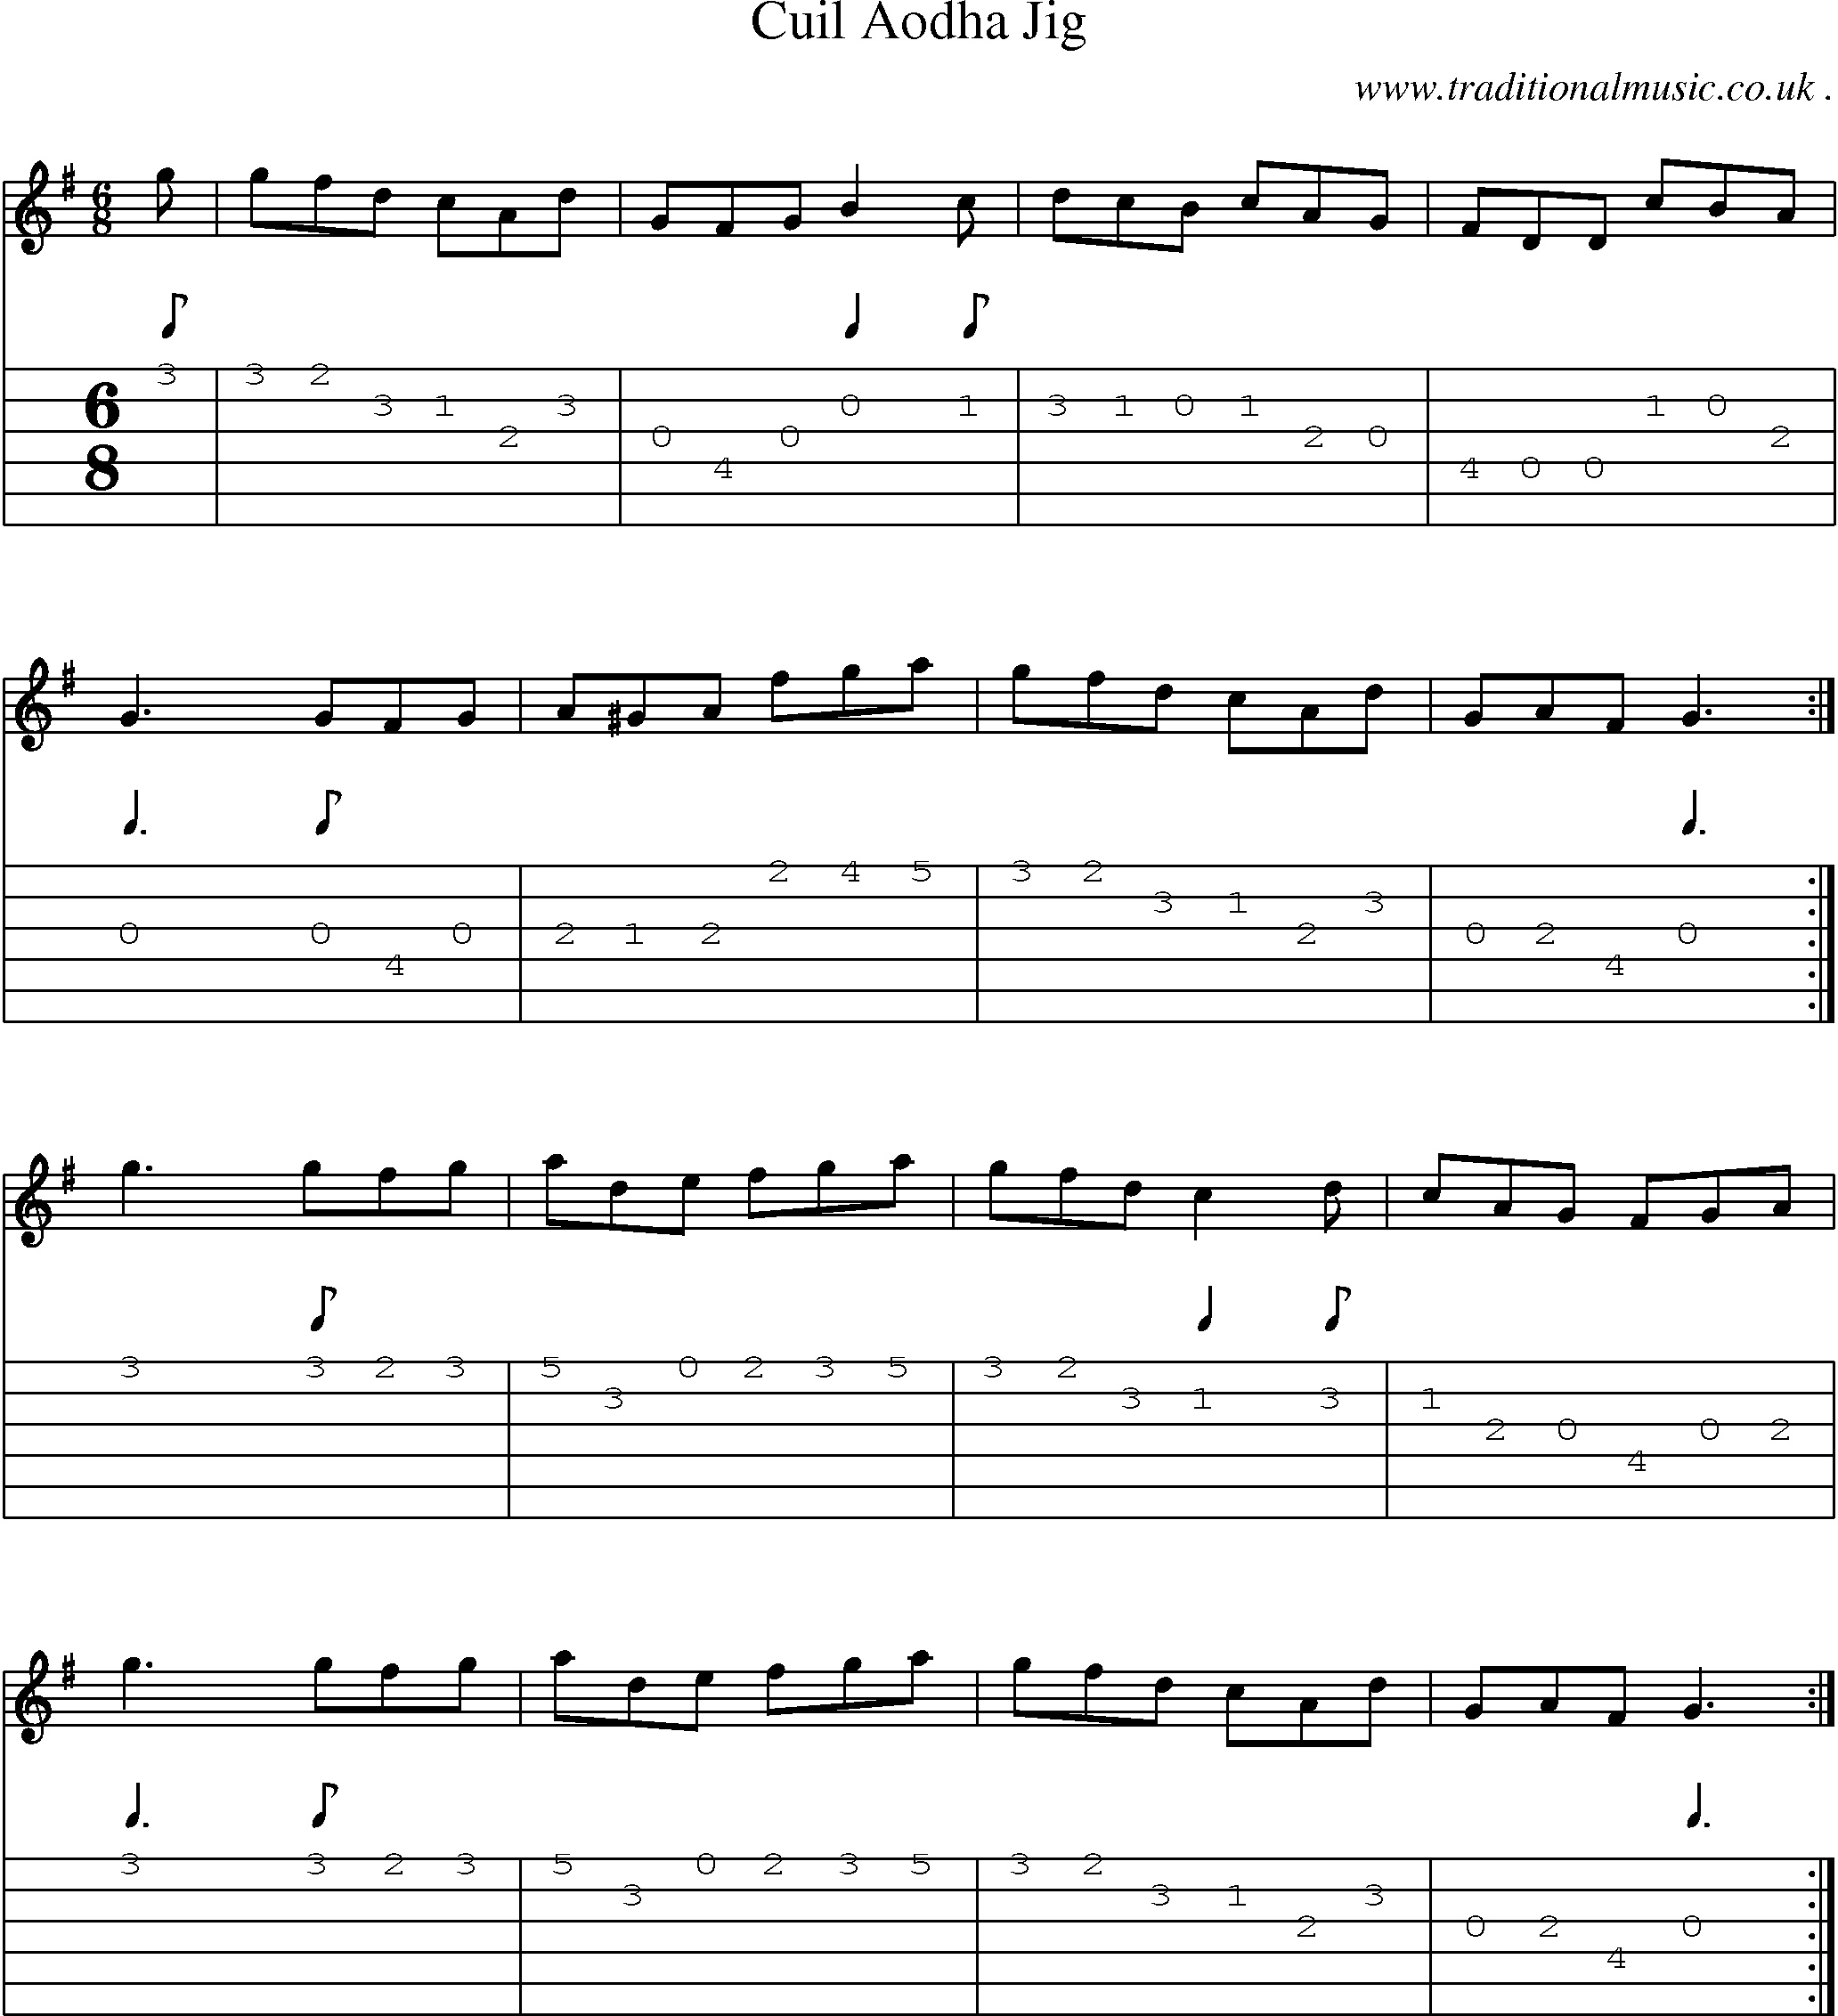 Sheet-Music and Guitar Tabs for Cuil Aodha Jig